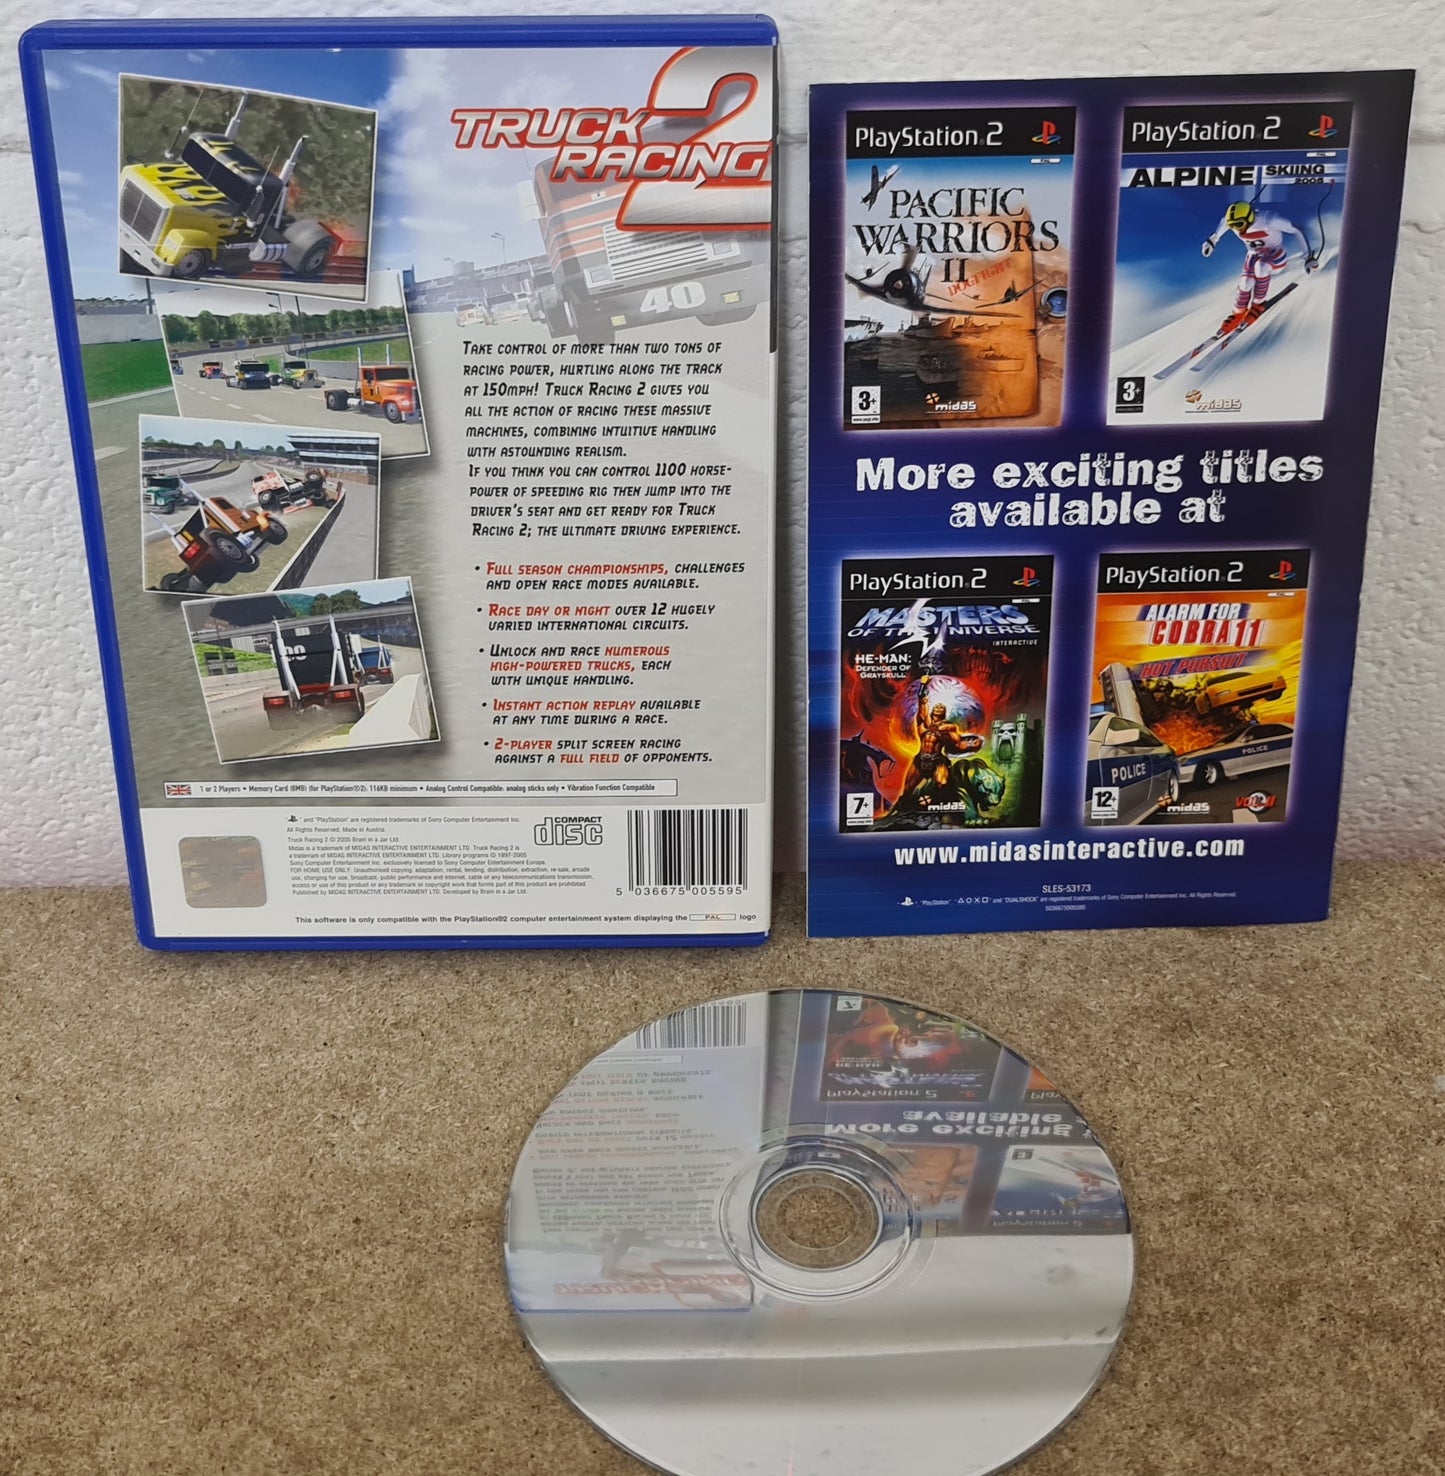 Truck Racing 2 Sony Playstation 2 (PS2) Game